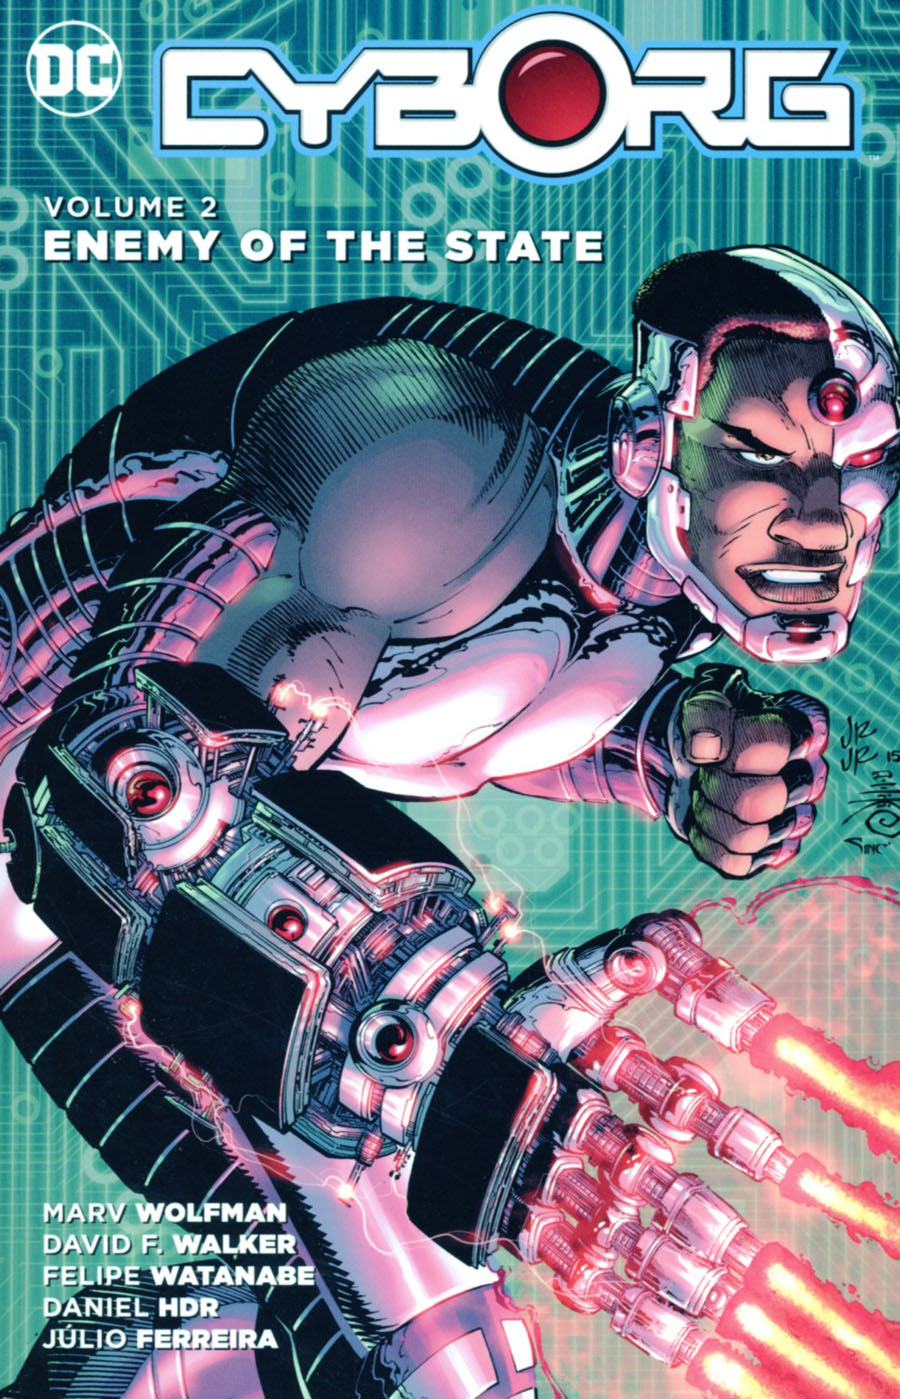 Cyborg (New 52) Vol 2 Enemy Of The State TP